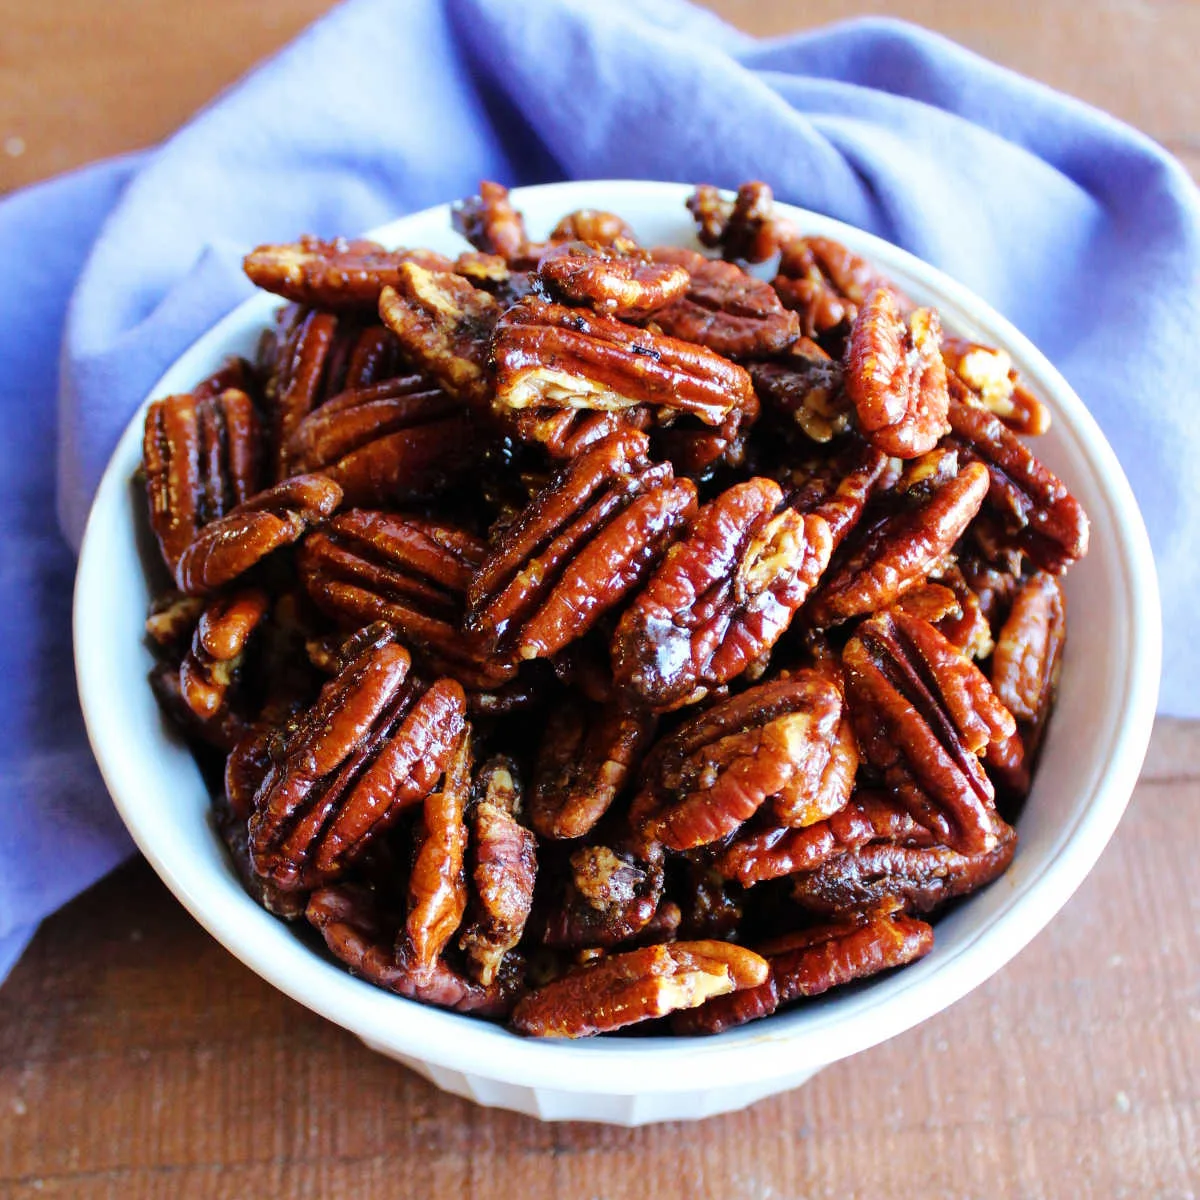 Bowl of spiced pecans, ready to eat.